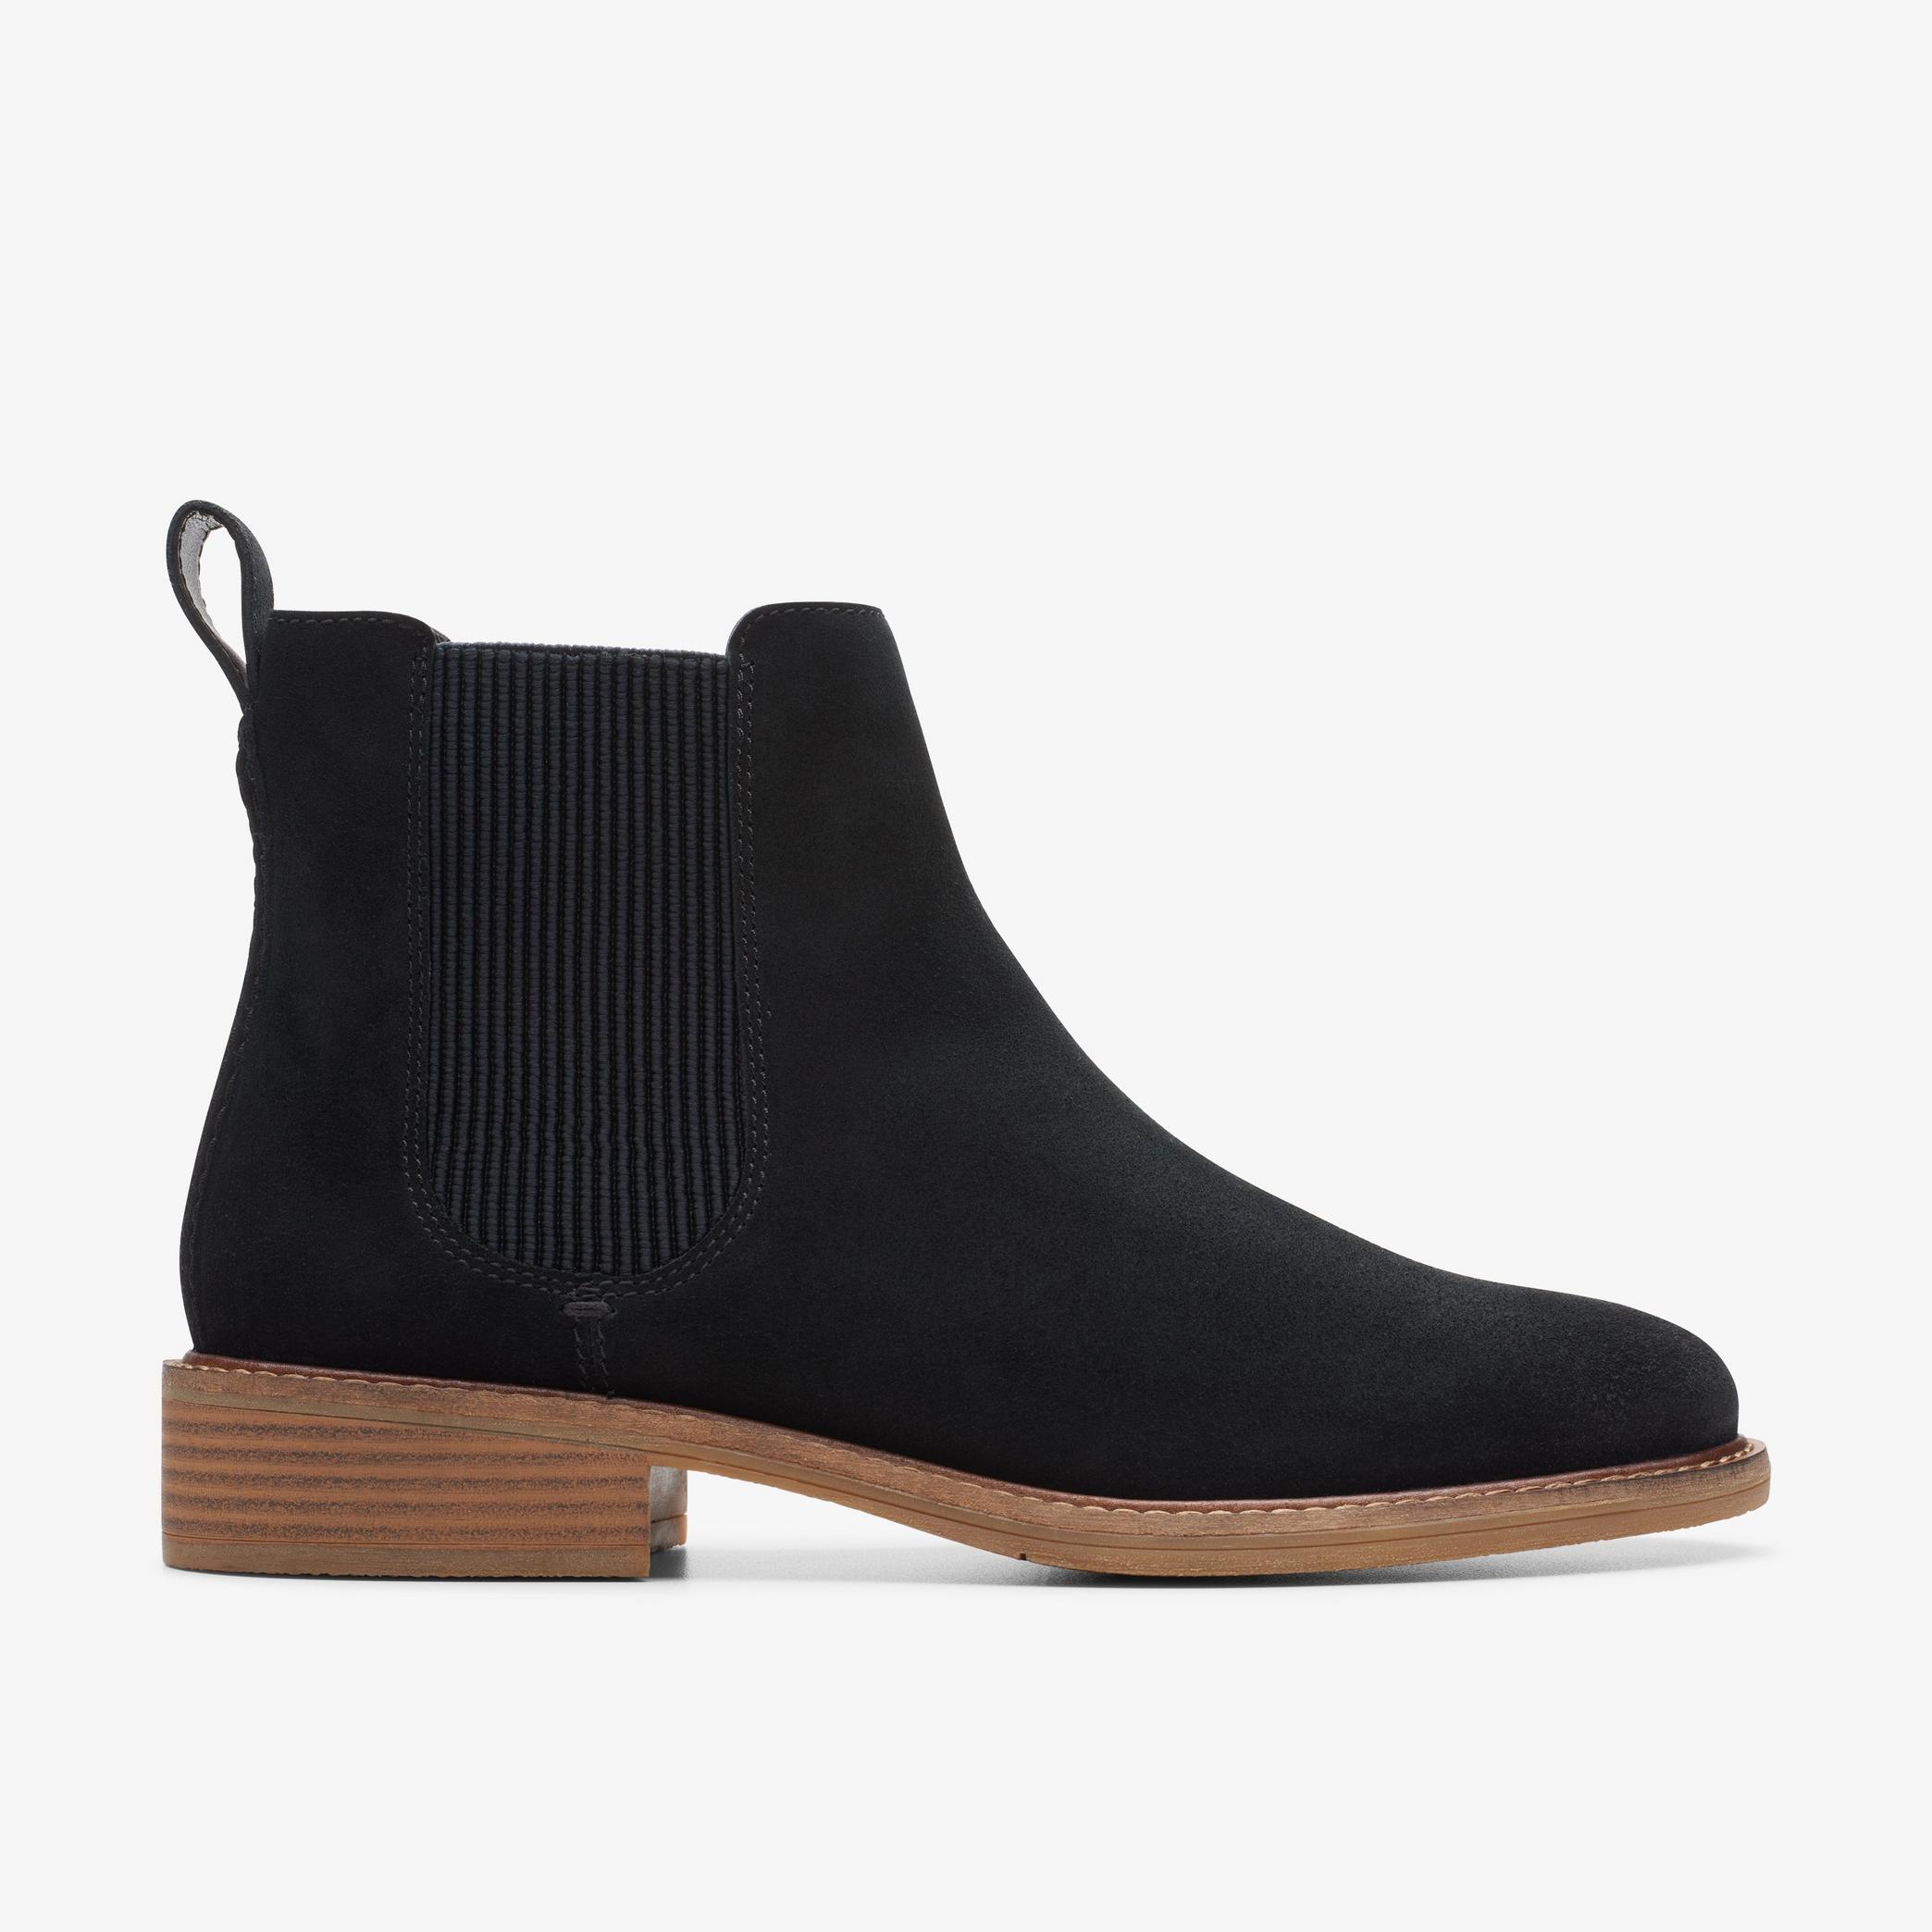 Cologne Arlo 2 Black Suede Chelsea Boots, view 1 of 7